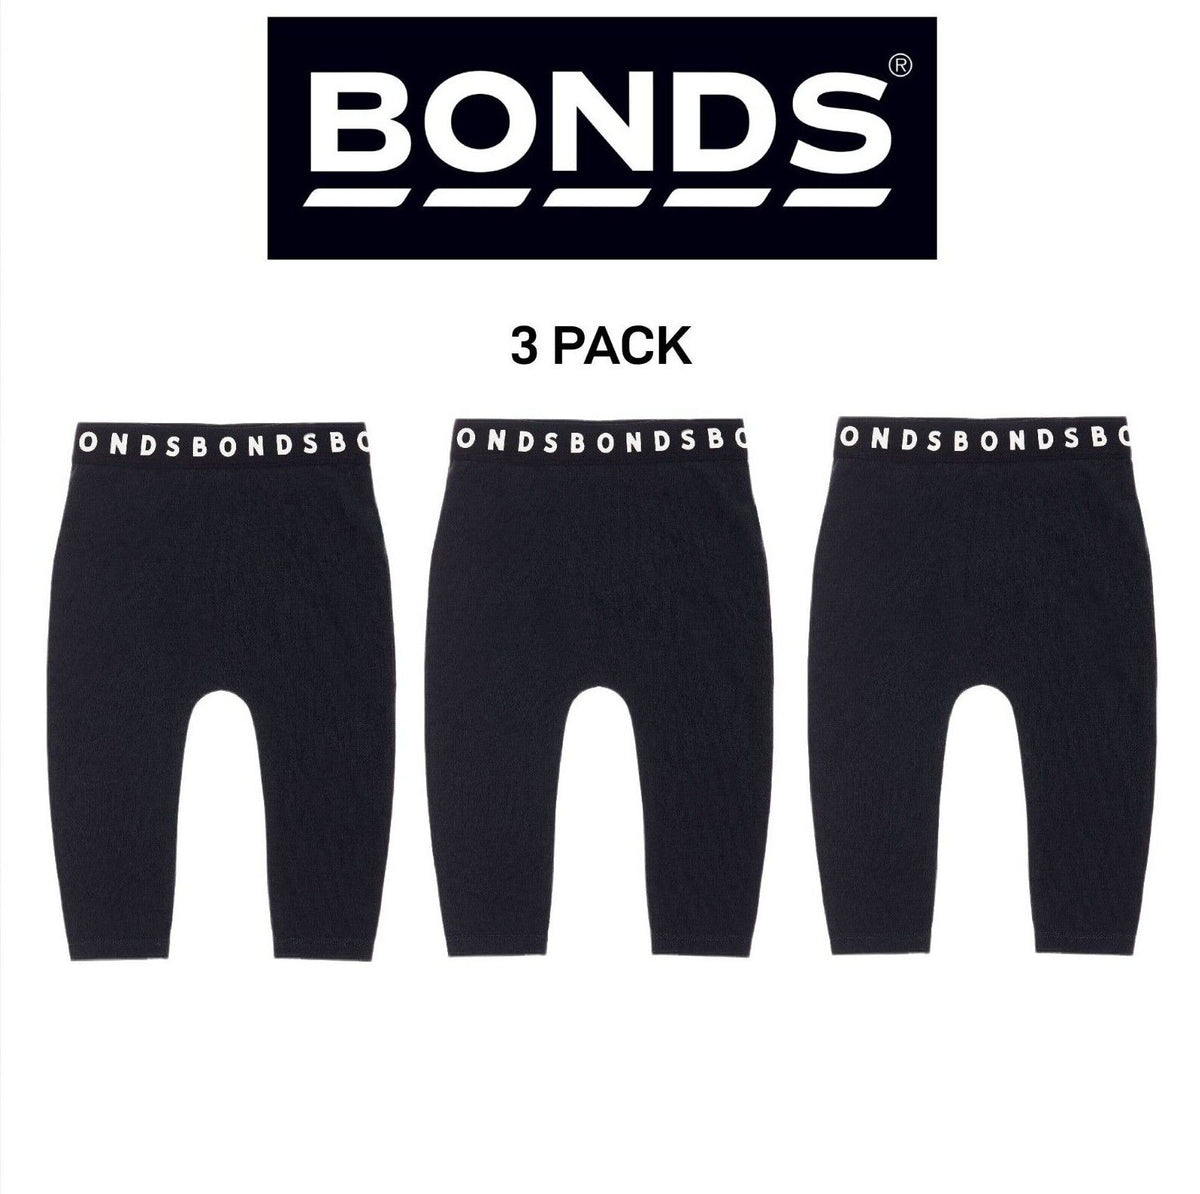 Bonds Baby Stretchies Legging Super Soft & Stretchable Comfortable 3 Pack BXF8A